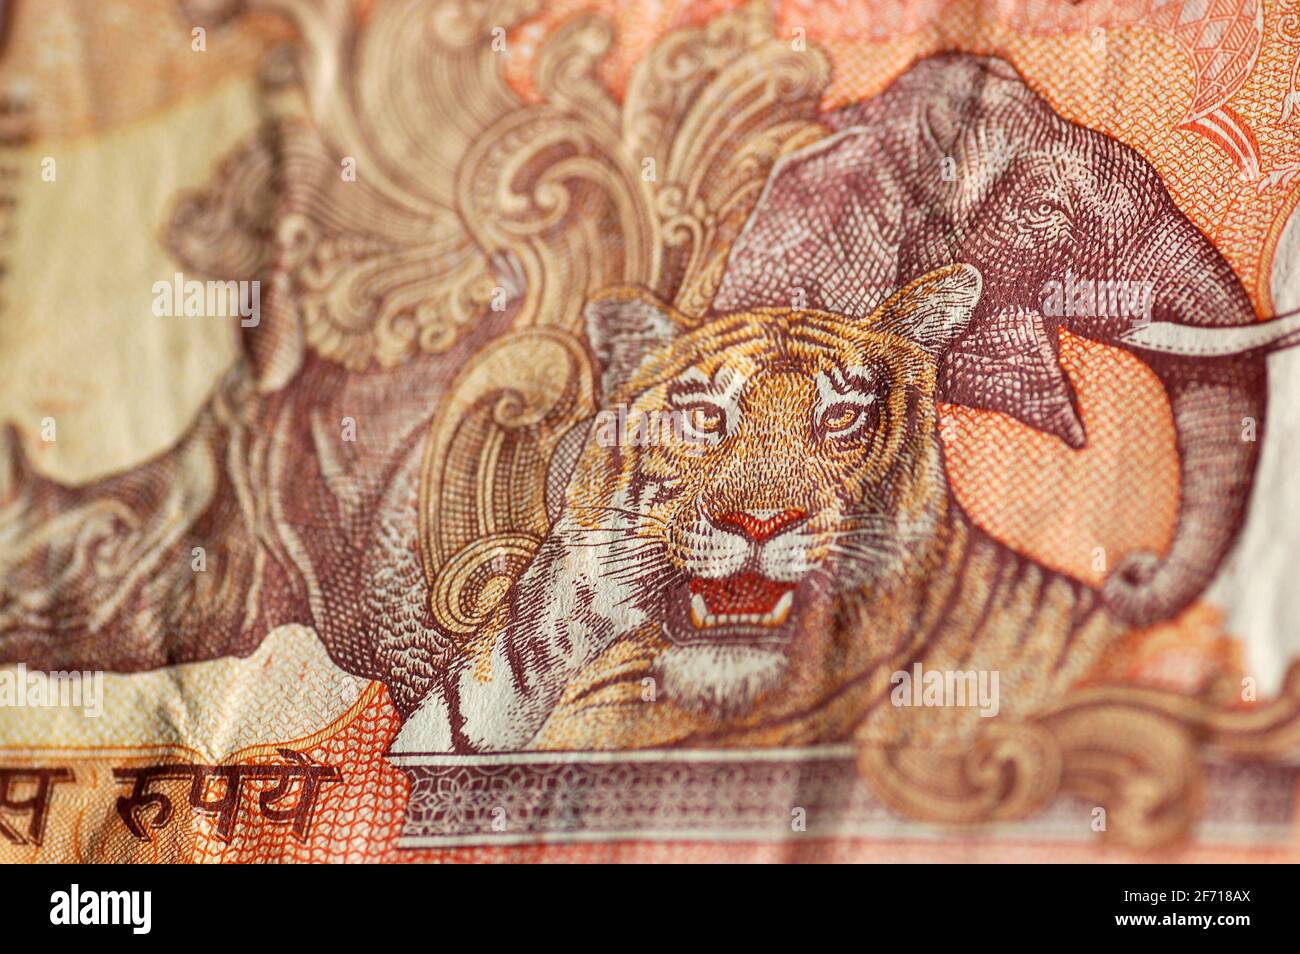 Detail of an Indian banknote showing animals from the country including a tiger, an elephant and a Rhinoceros. Used banknote, photographed at an angle Stock Photo